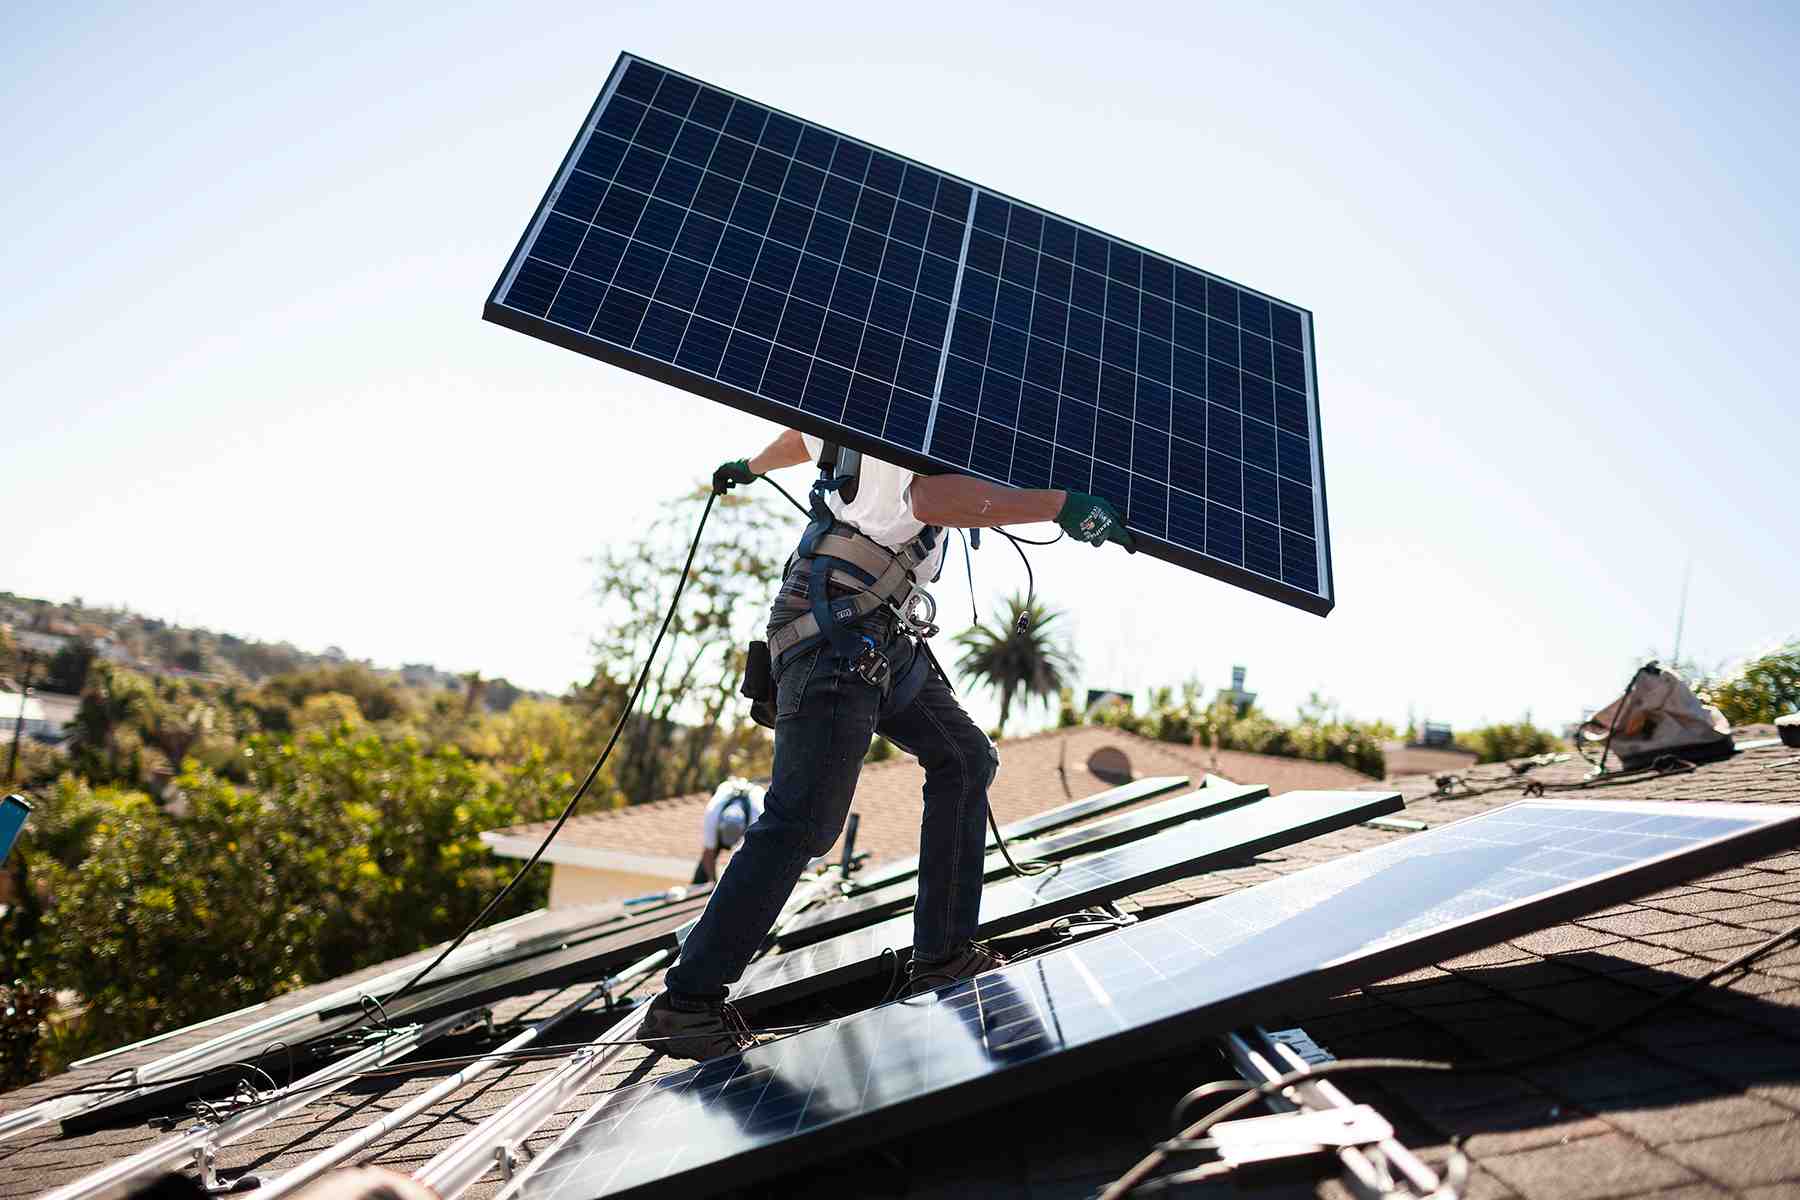 What is the average cost of solar panels?